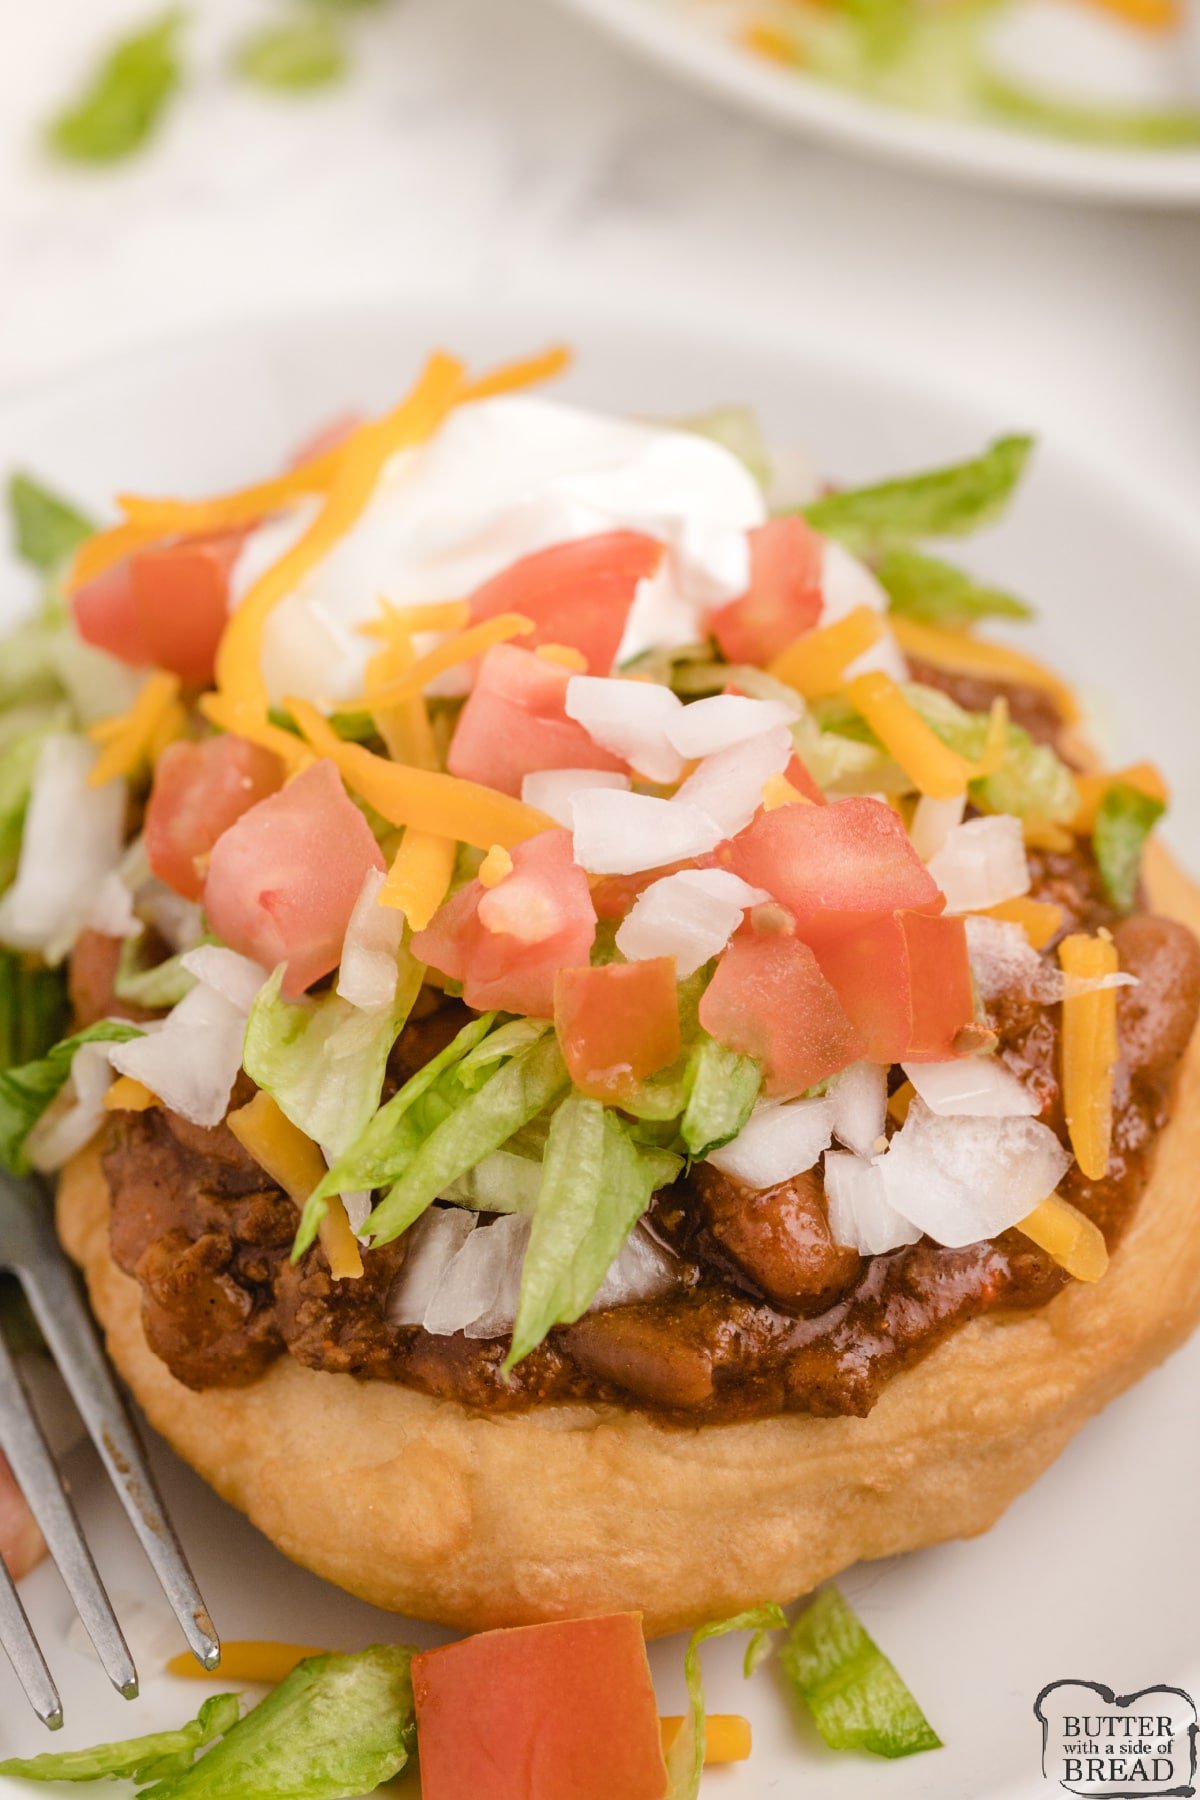 Simple fry bread topped with chili, cheese, lettuce, tomatoes, onions and sour cream